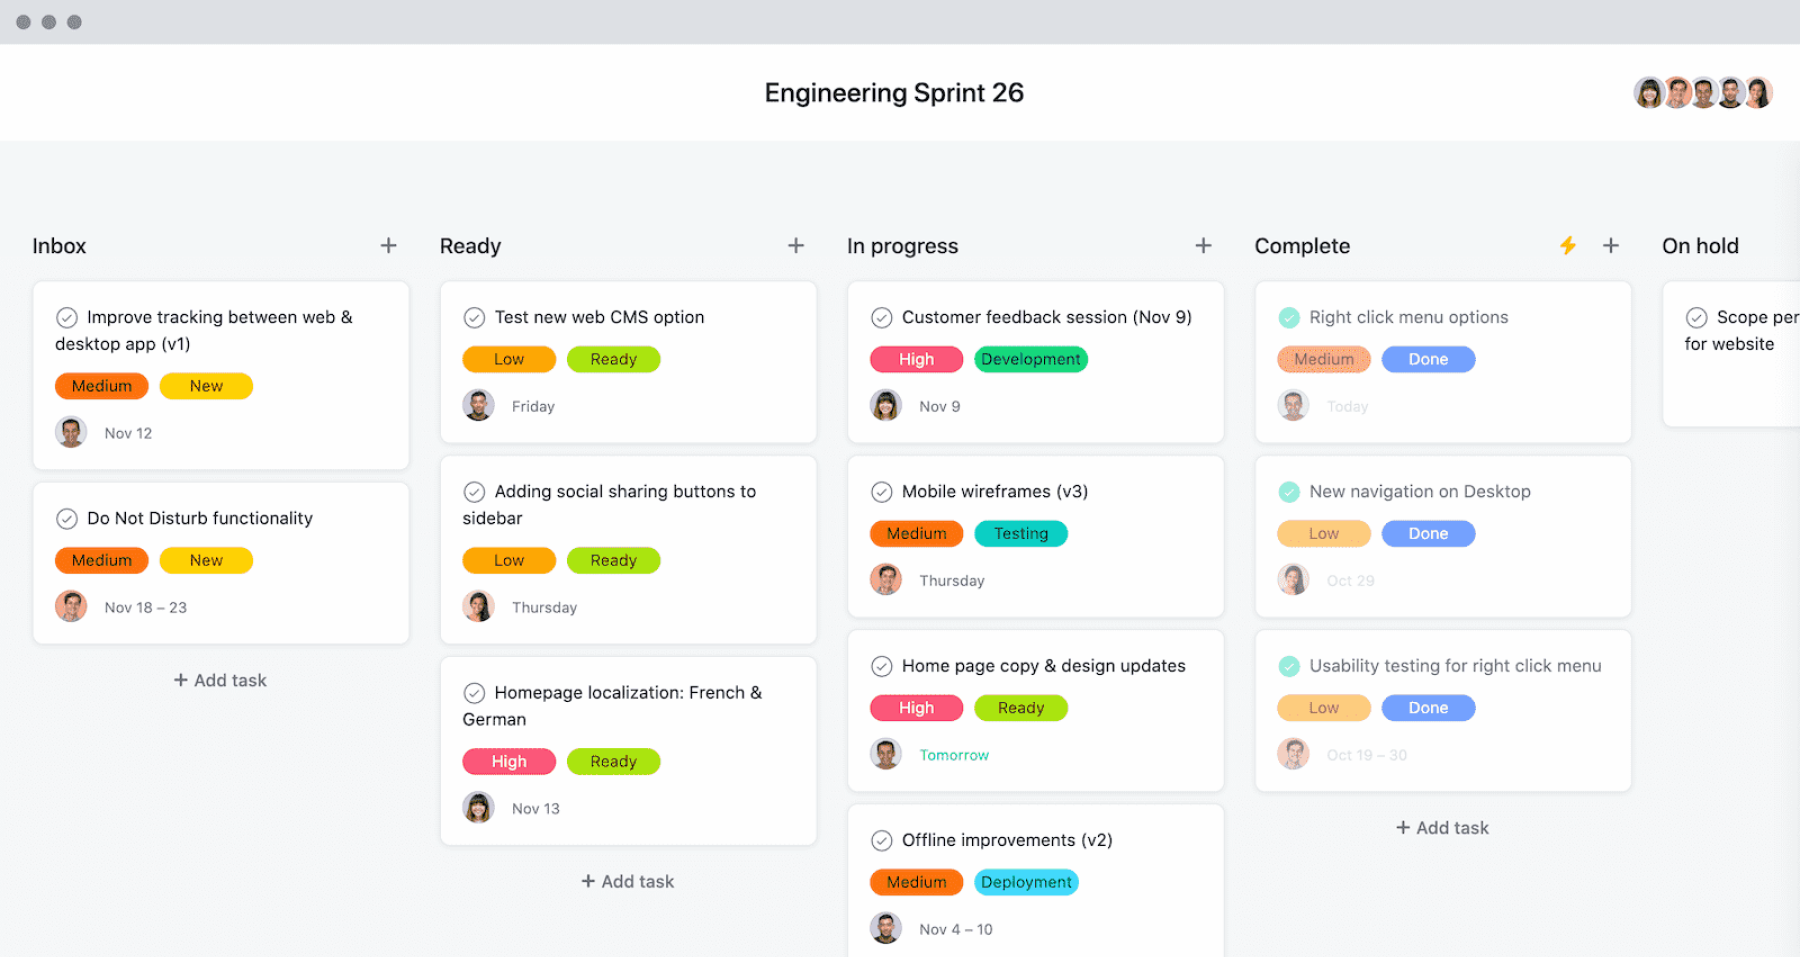 Asana - Best for Kanban-style task scheduling